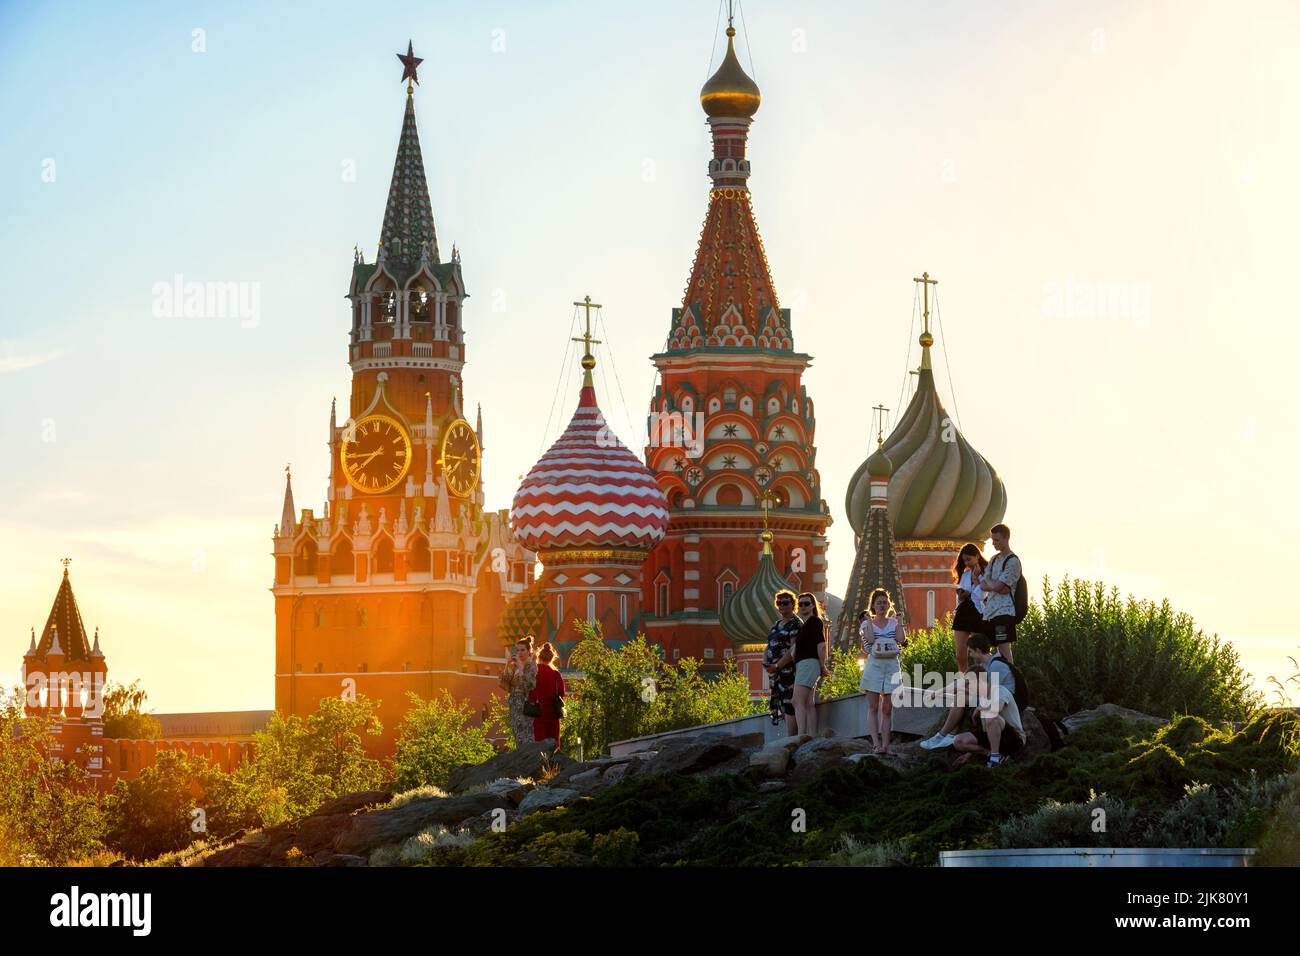 Moscow - Jun 28, 2022: People walk in Zaryadye Park near Kremlin and St Basil's Cathedral, Moscow, Russia. This place is famous tourist attraction of Stock Photo